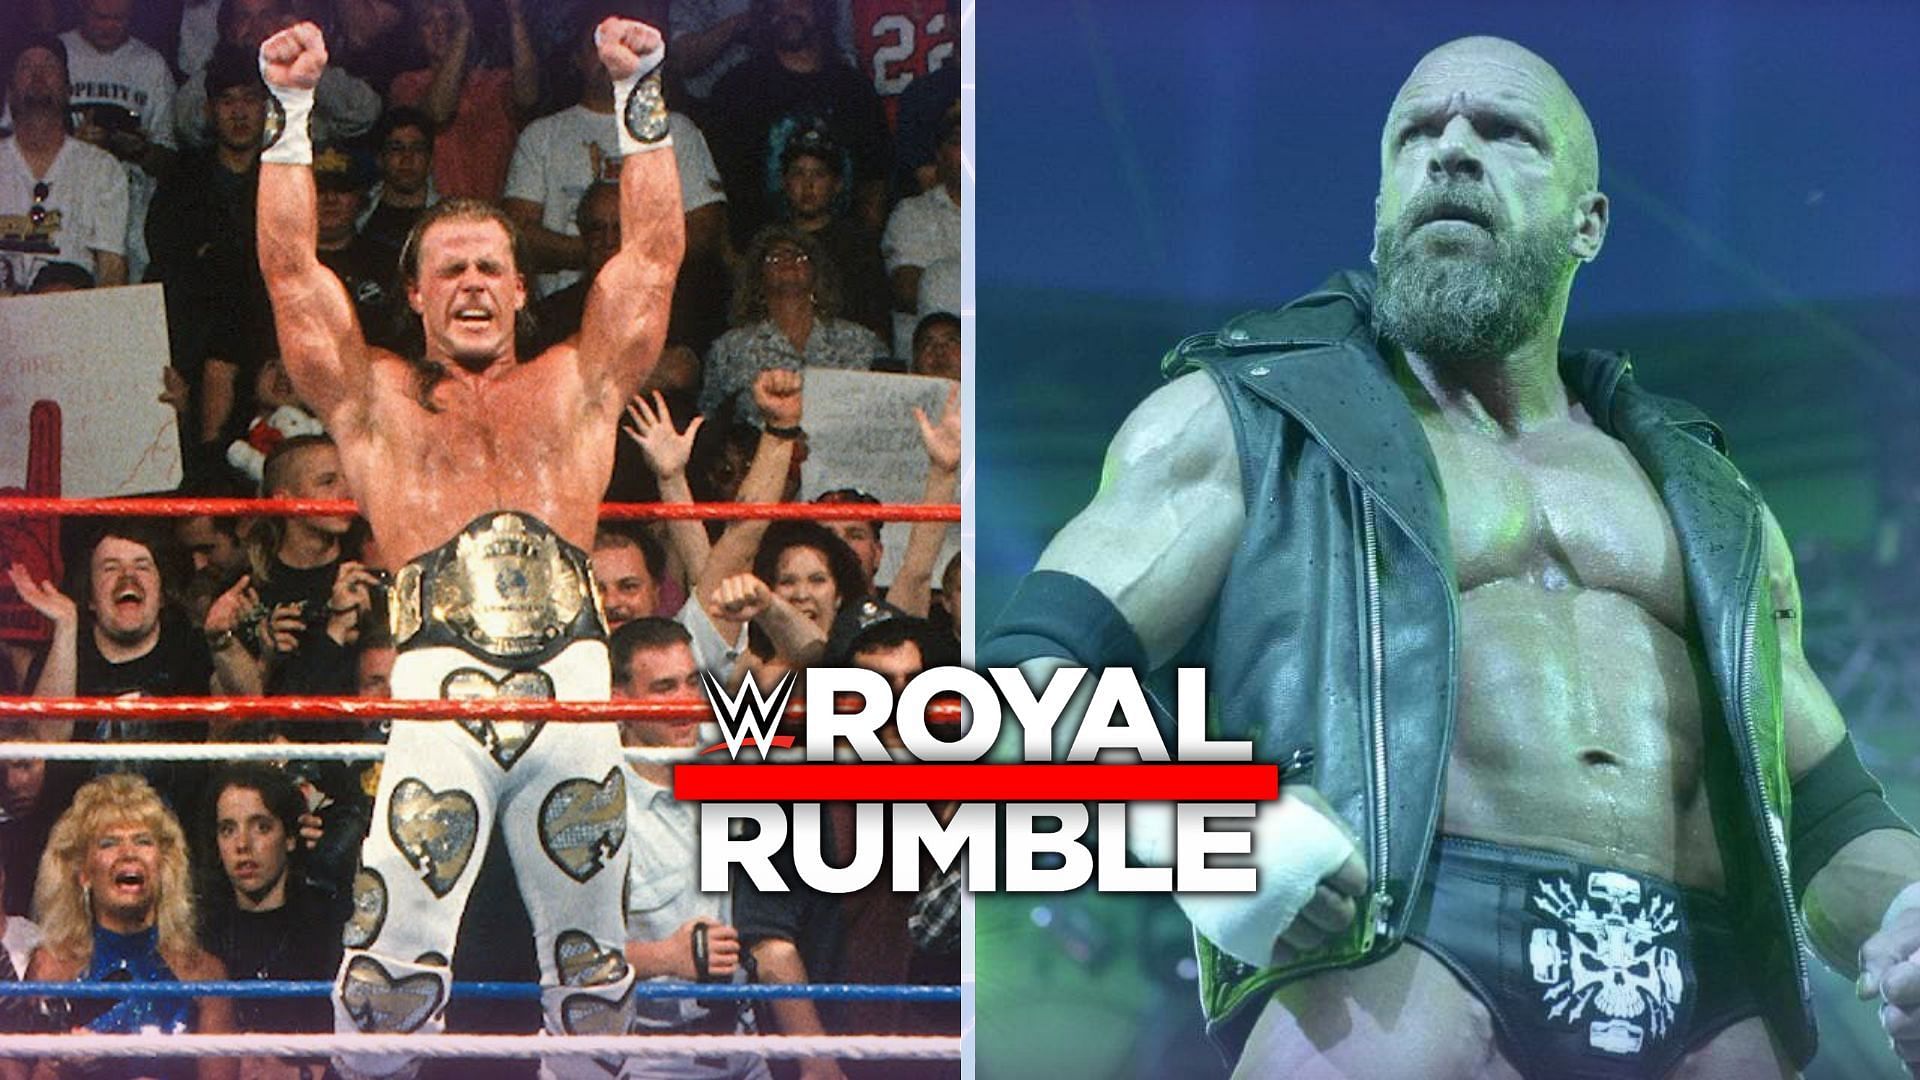 Major Royal Rumble moments took place this week in WWE history